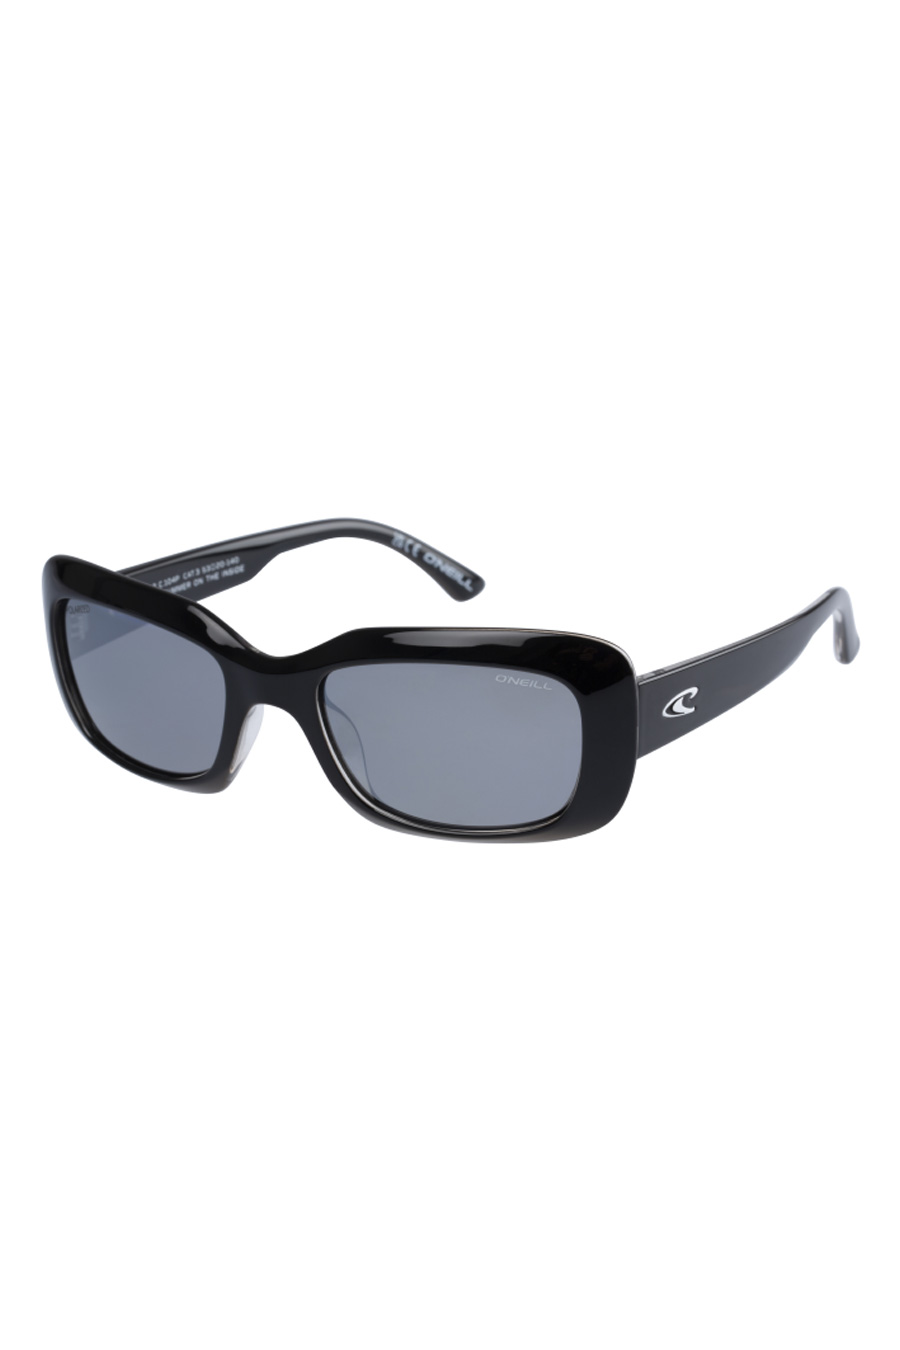 Saulesbrilles ONEILL ONS-9012-20-104P